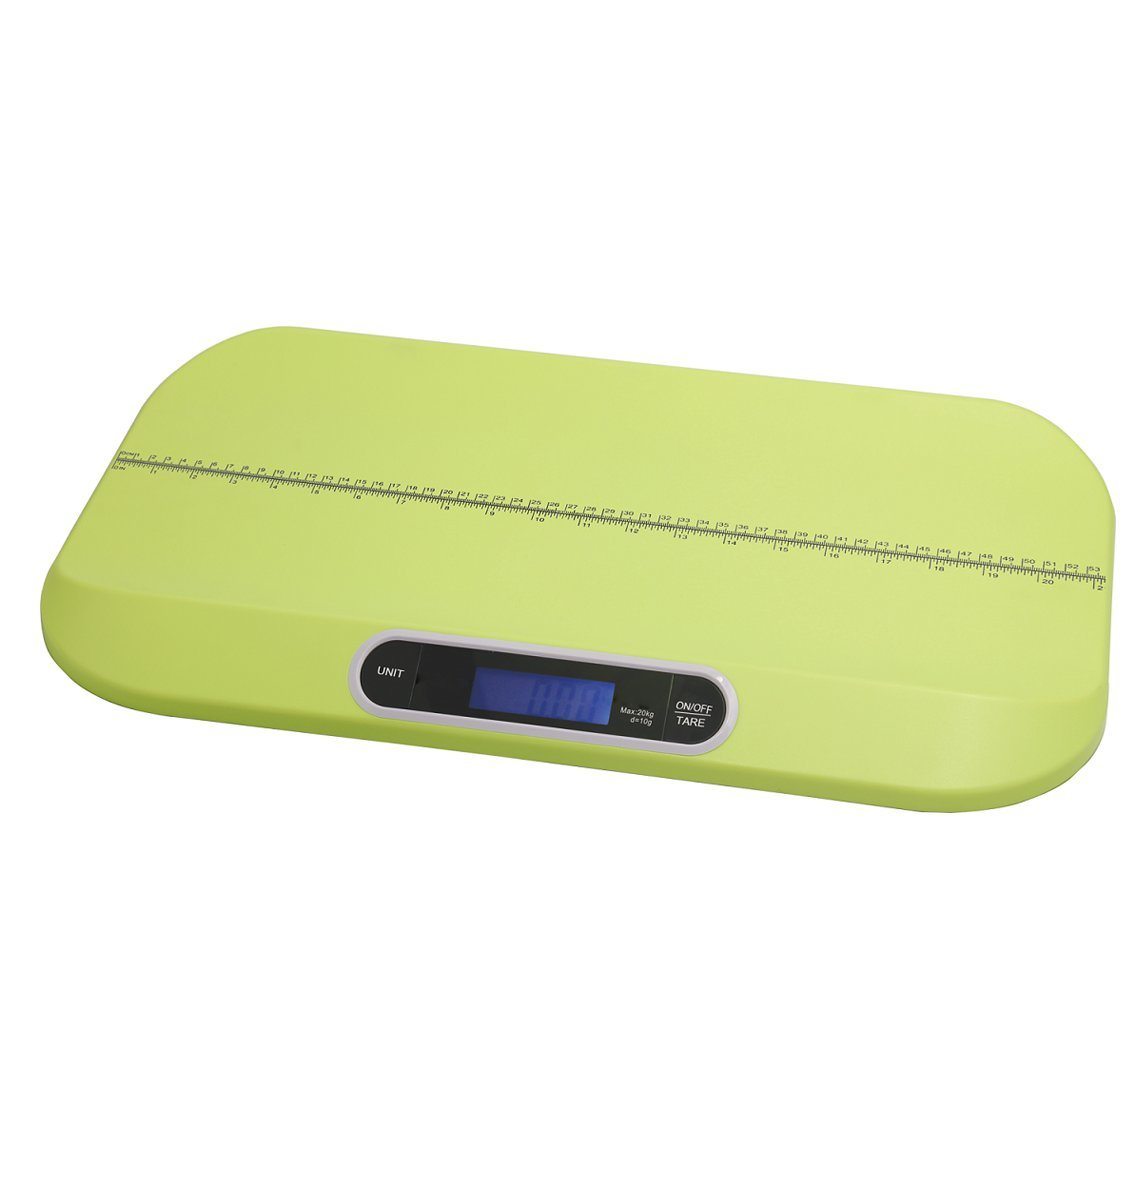 MS-B340 Super Thin Baby Scales